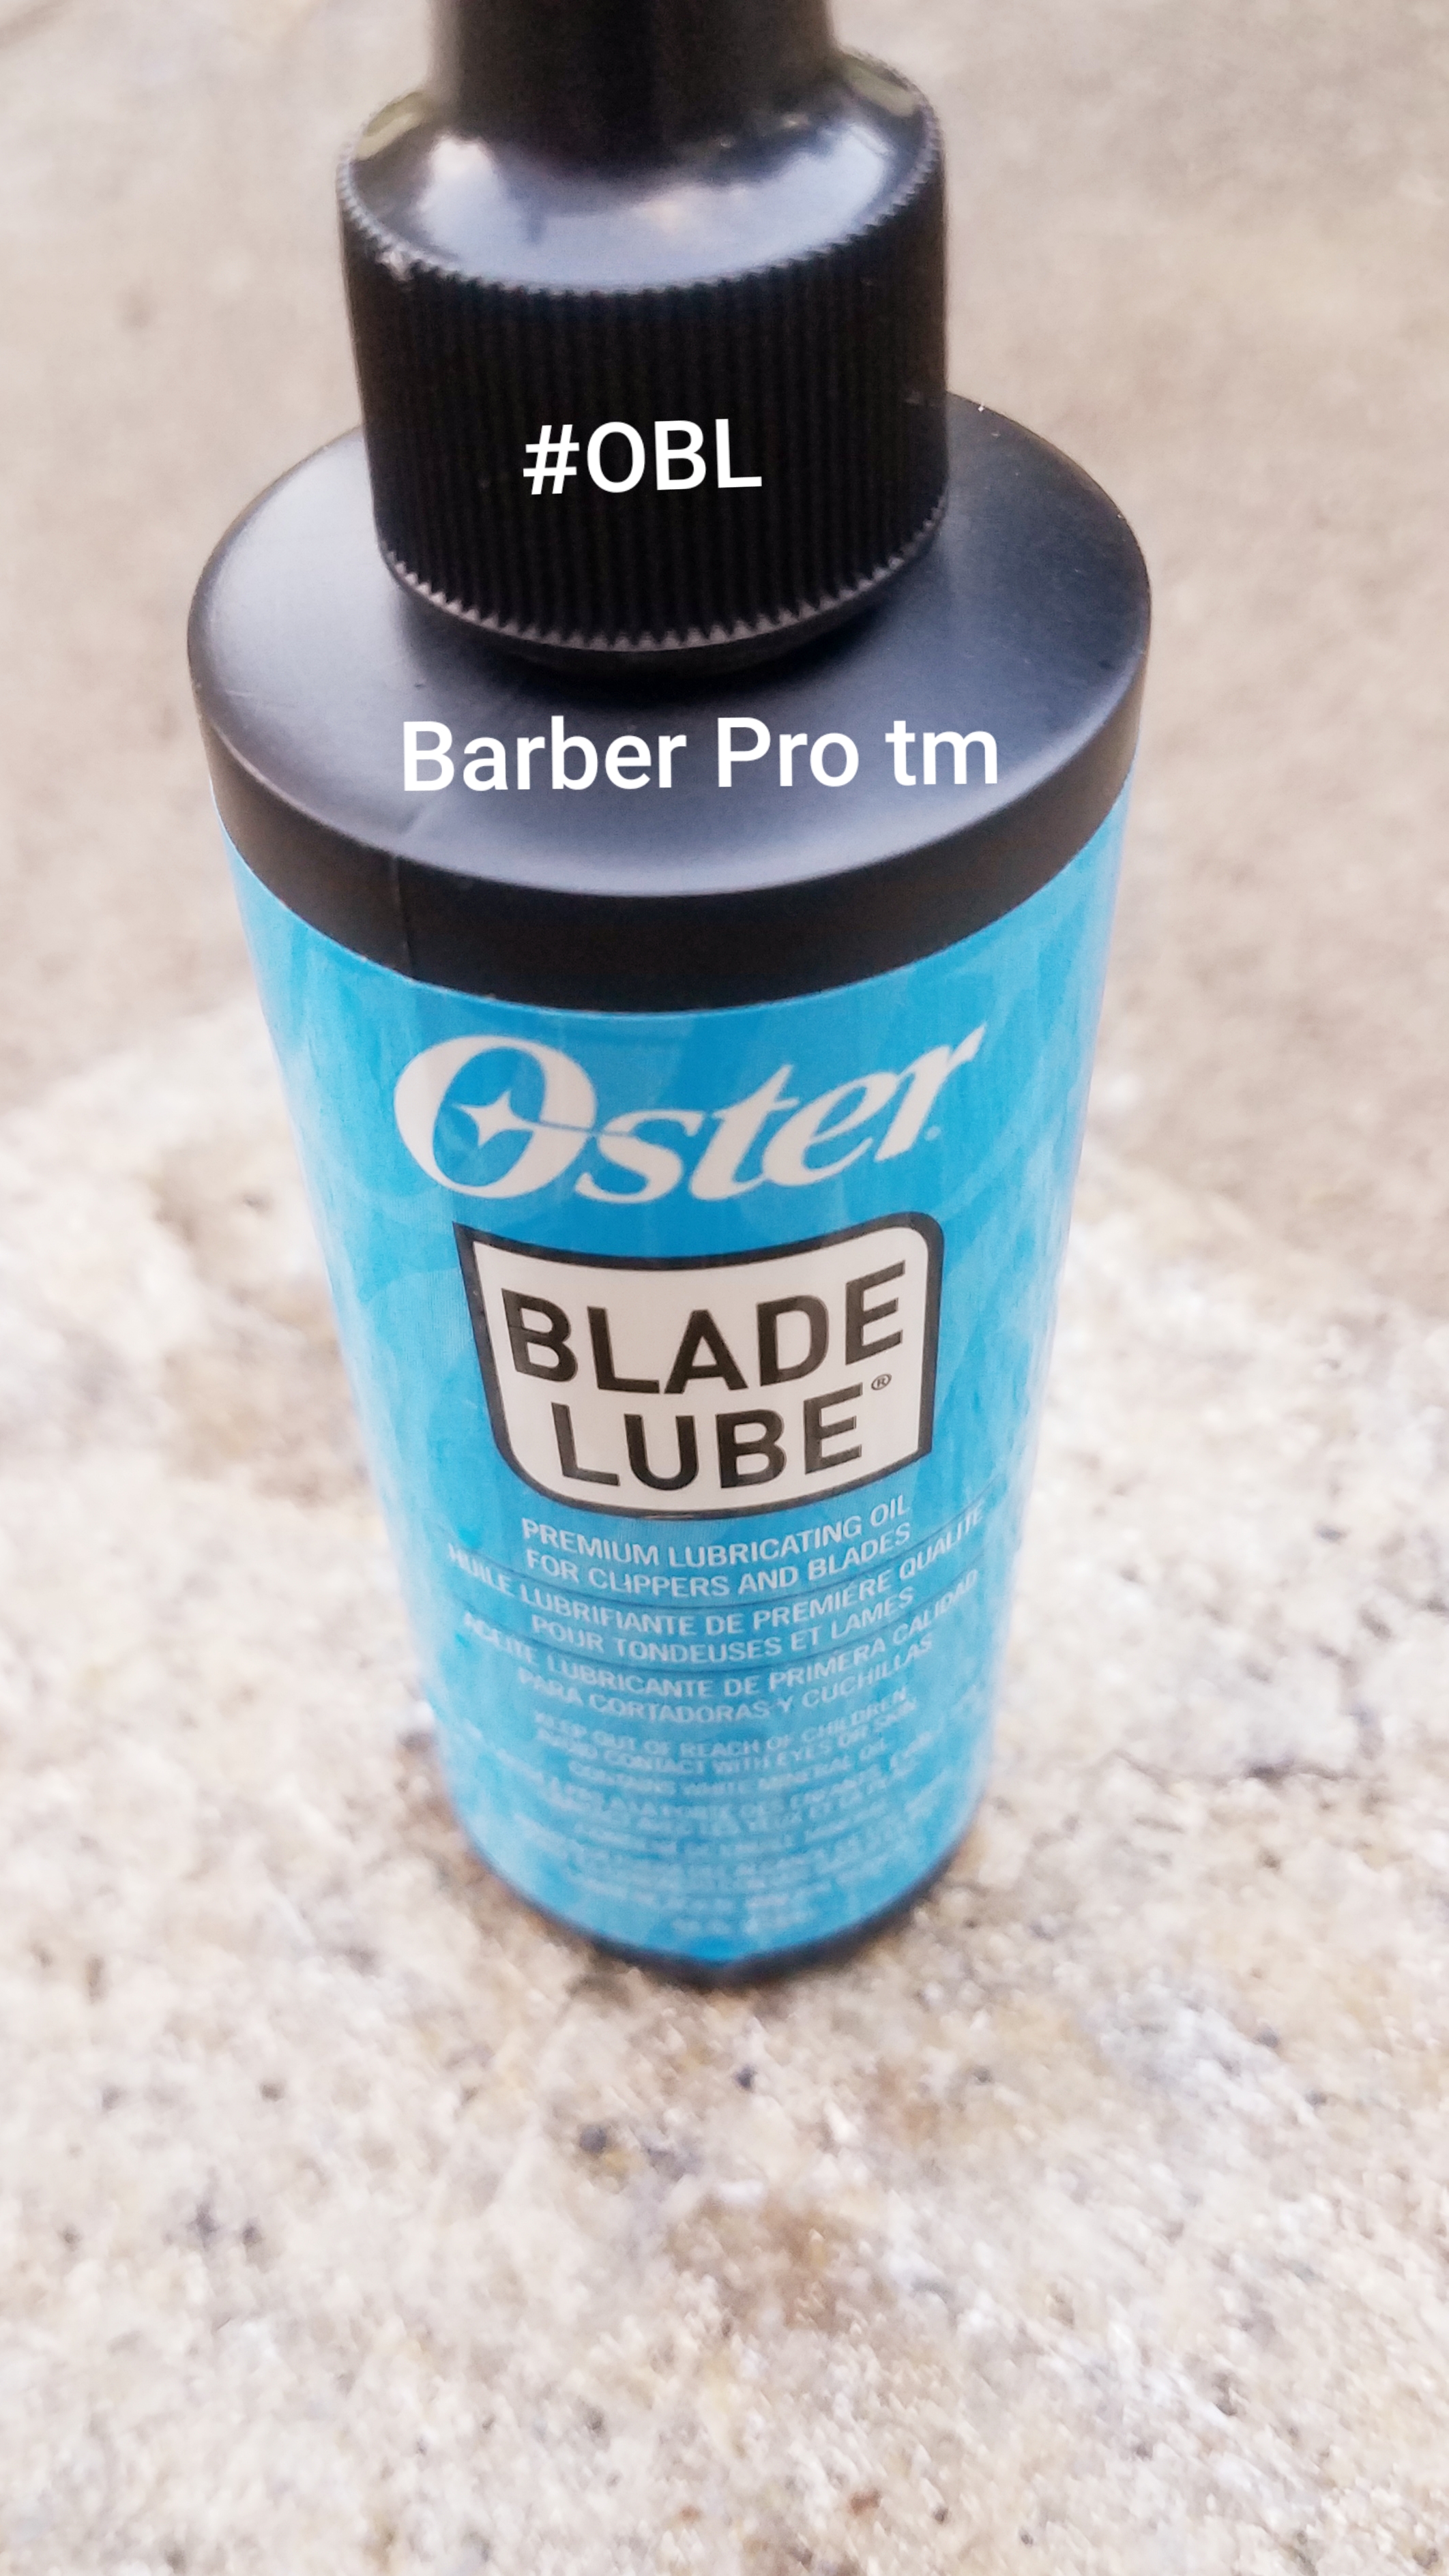 #OBL FROM BARBER PRO tm POLLY PRODUCTS, MADE IN THE USA